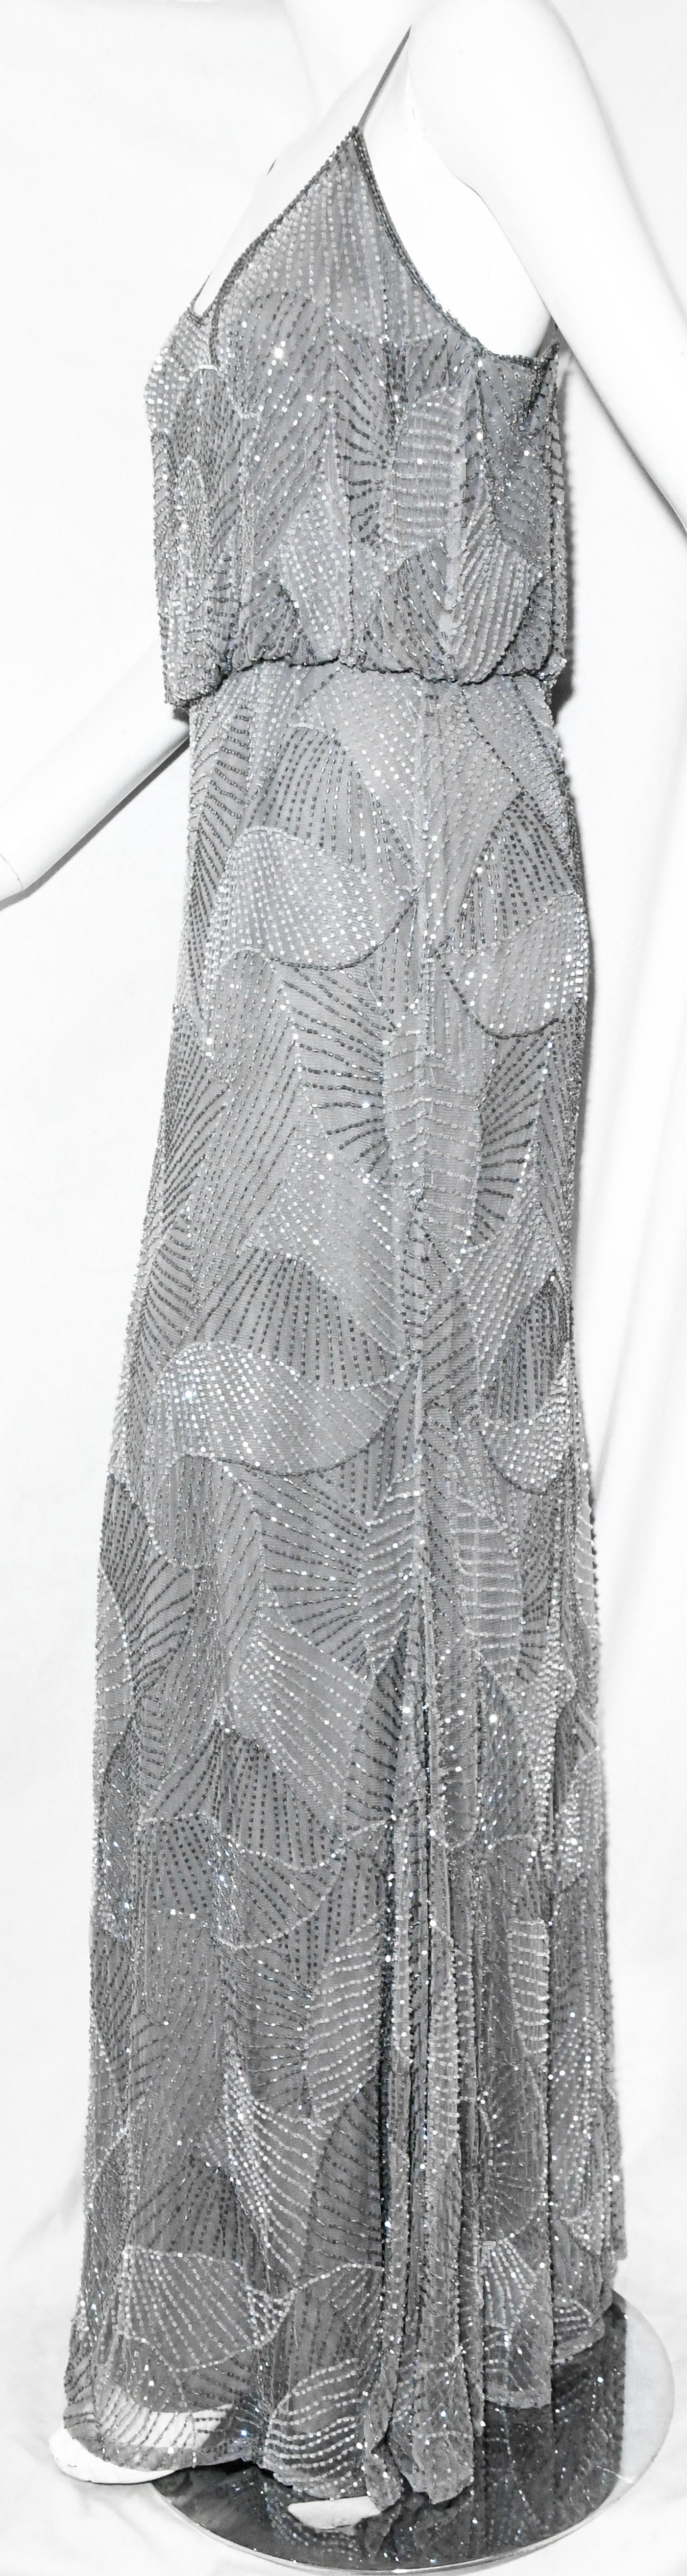 Armani Collezioni beaded grey gown in shell design embroidered throughout. With V neckline and spaghetti straps this blouson bodice and bias cut column skirt will stand out at your event.  For closure, a zipper at the back.   This gown is